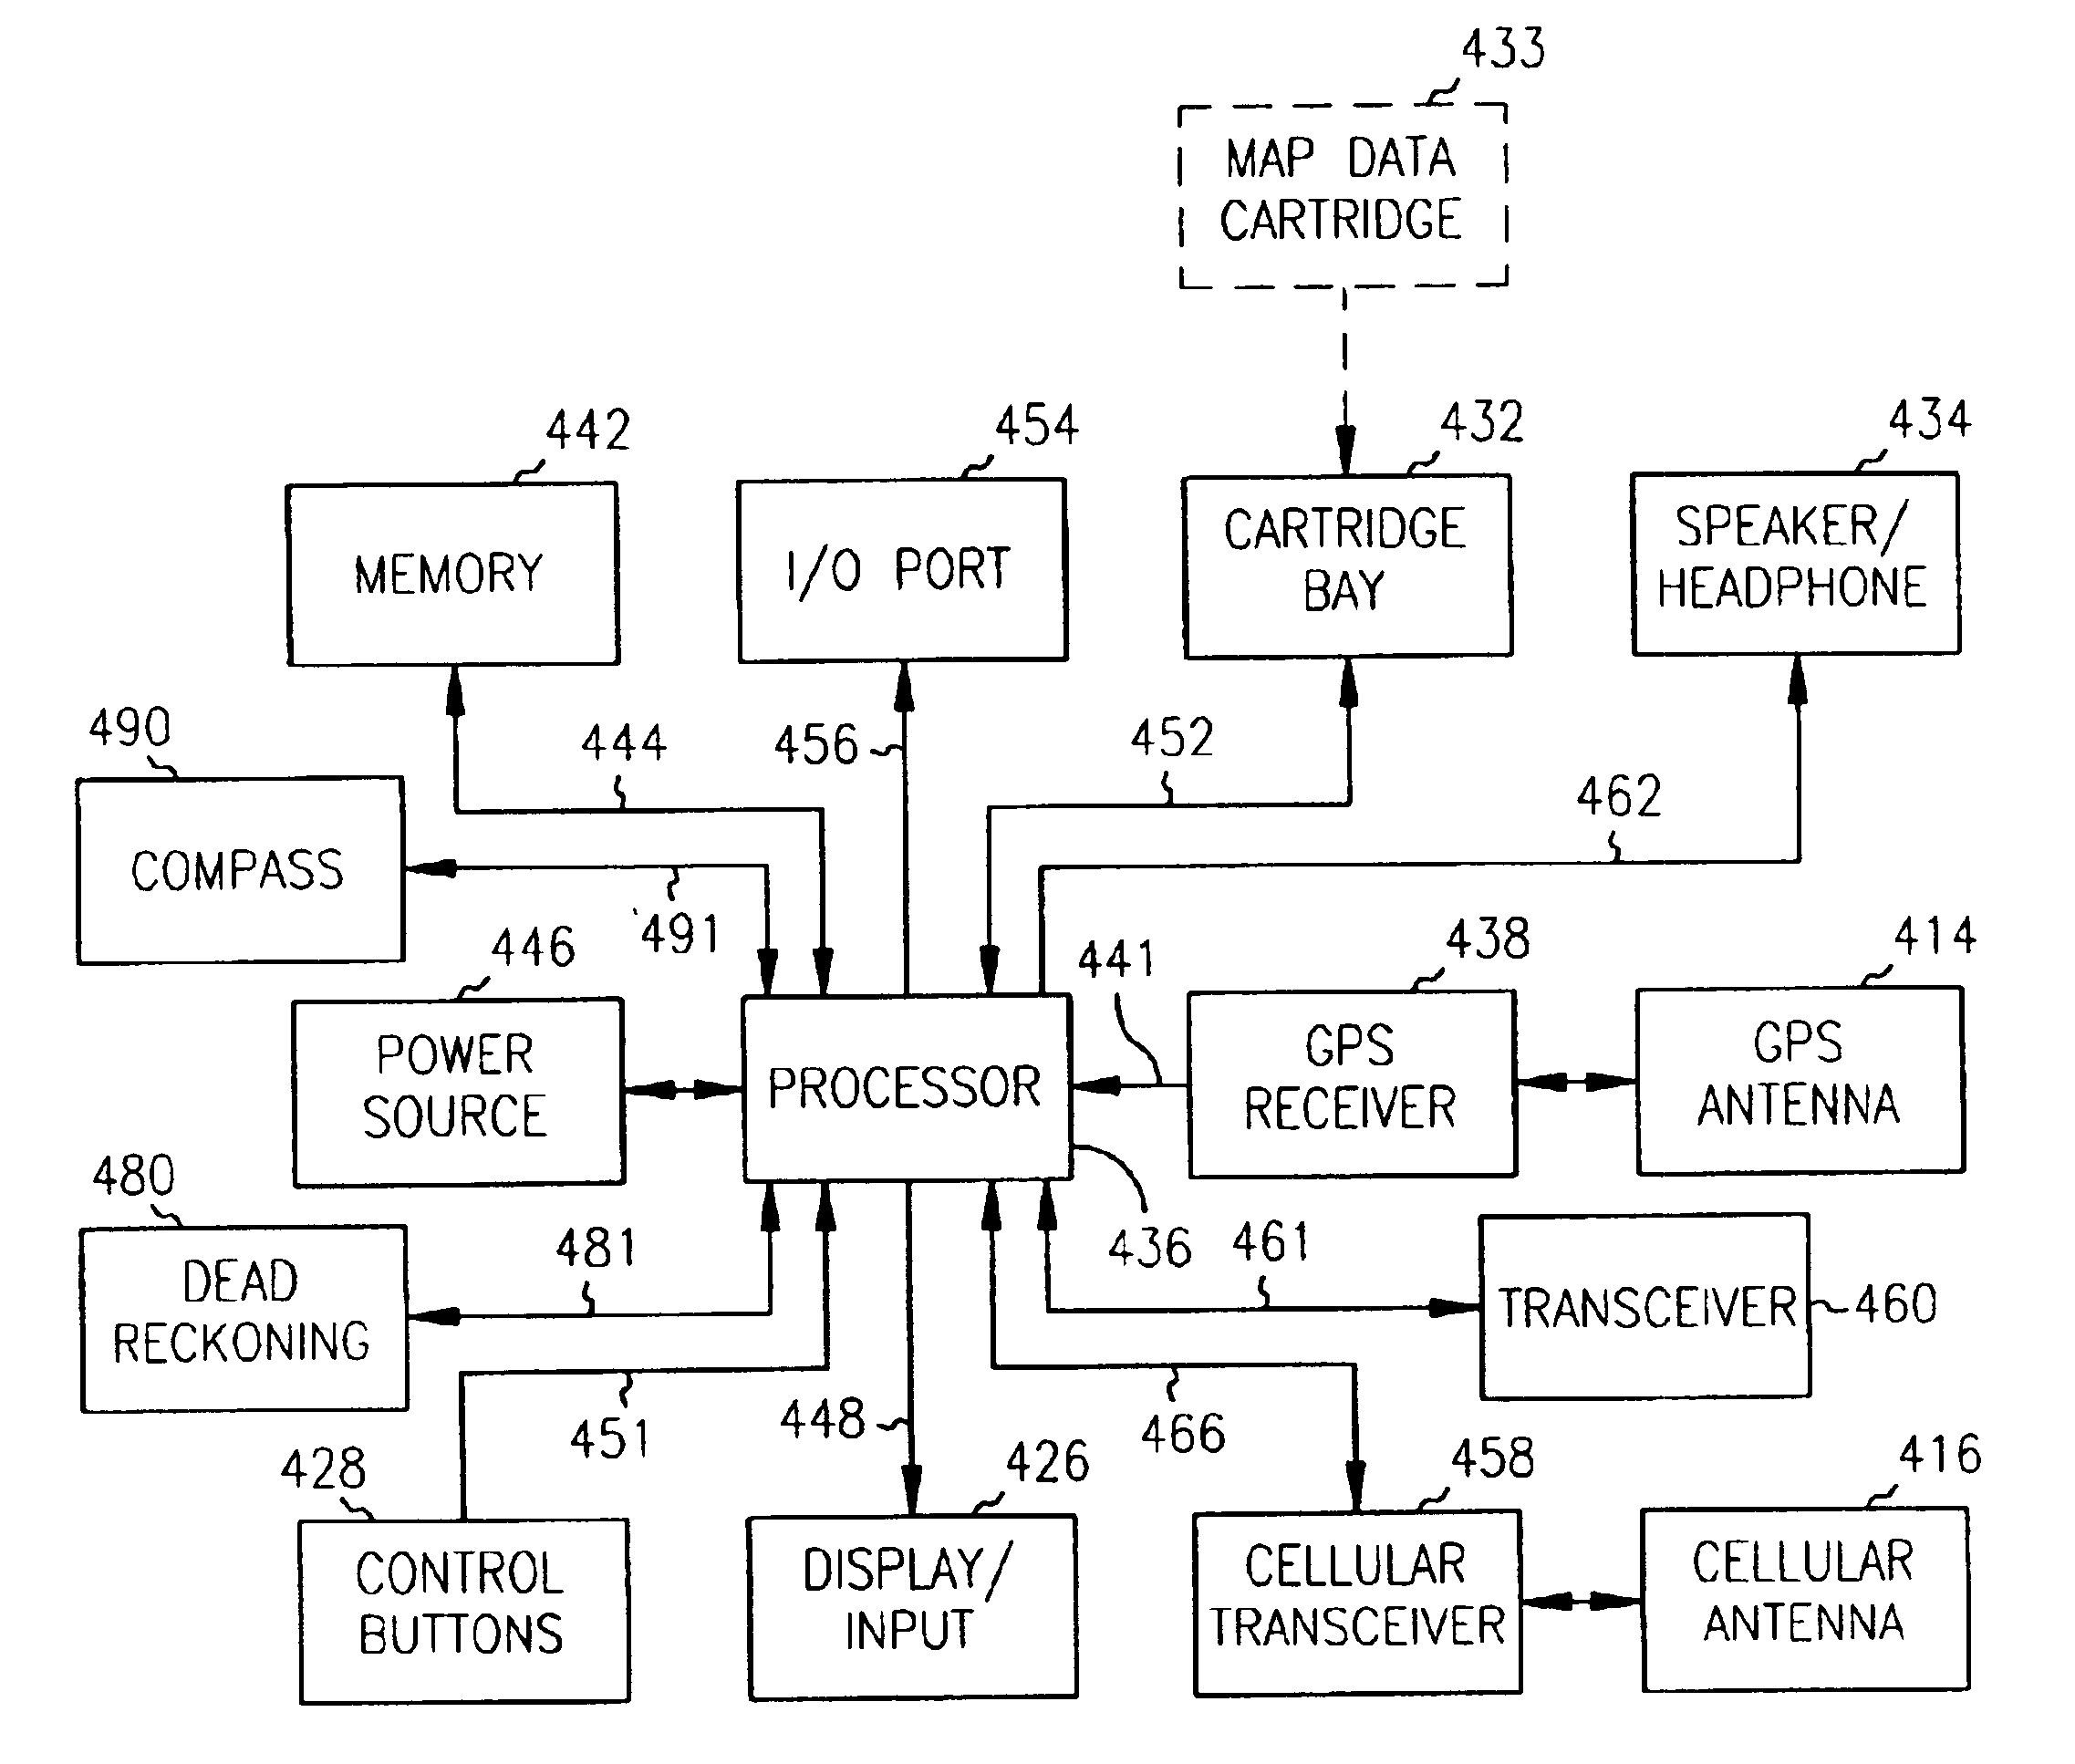 Portable navigation device with integrated GPS and dead reckoning capabilities